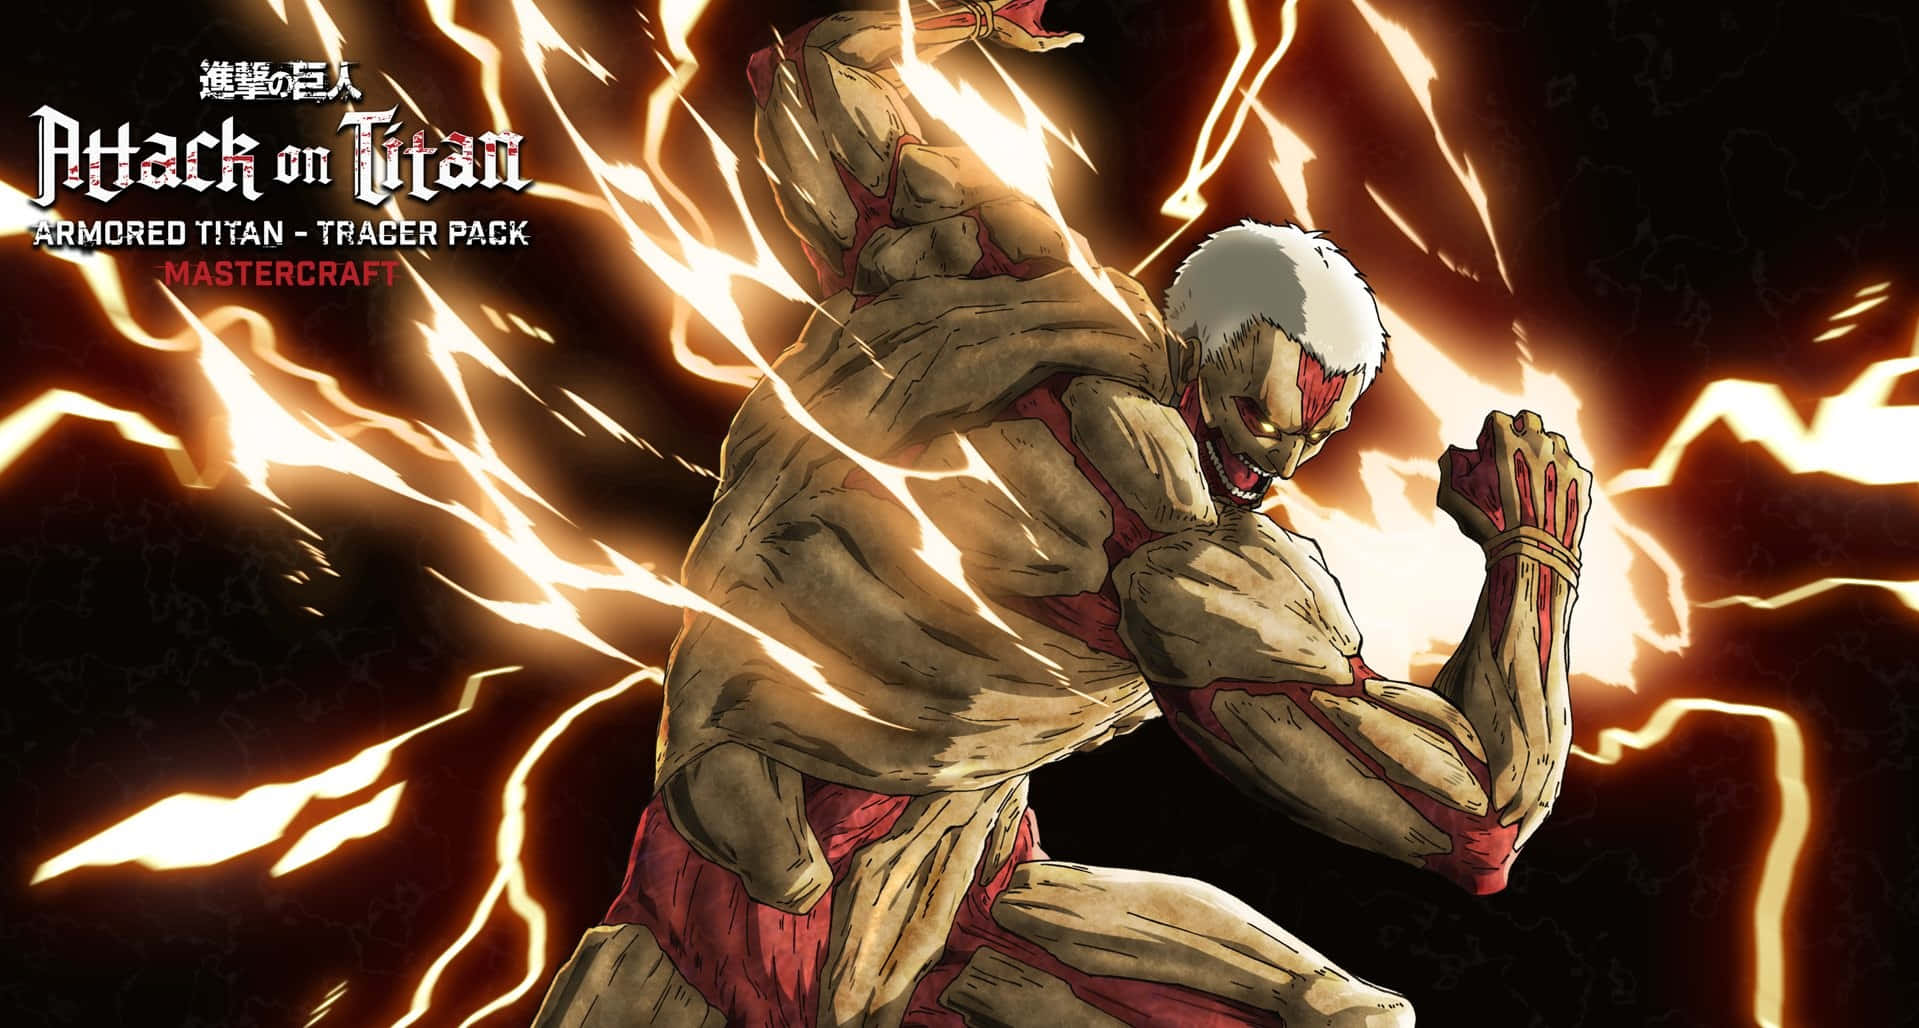 Experience the action and thrills of Attack On Titan in the Video Game Wallpaper